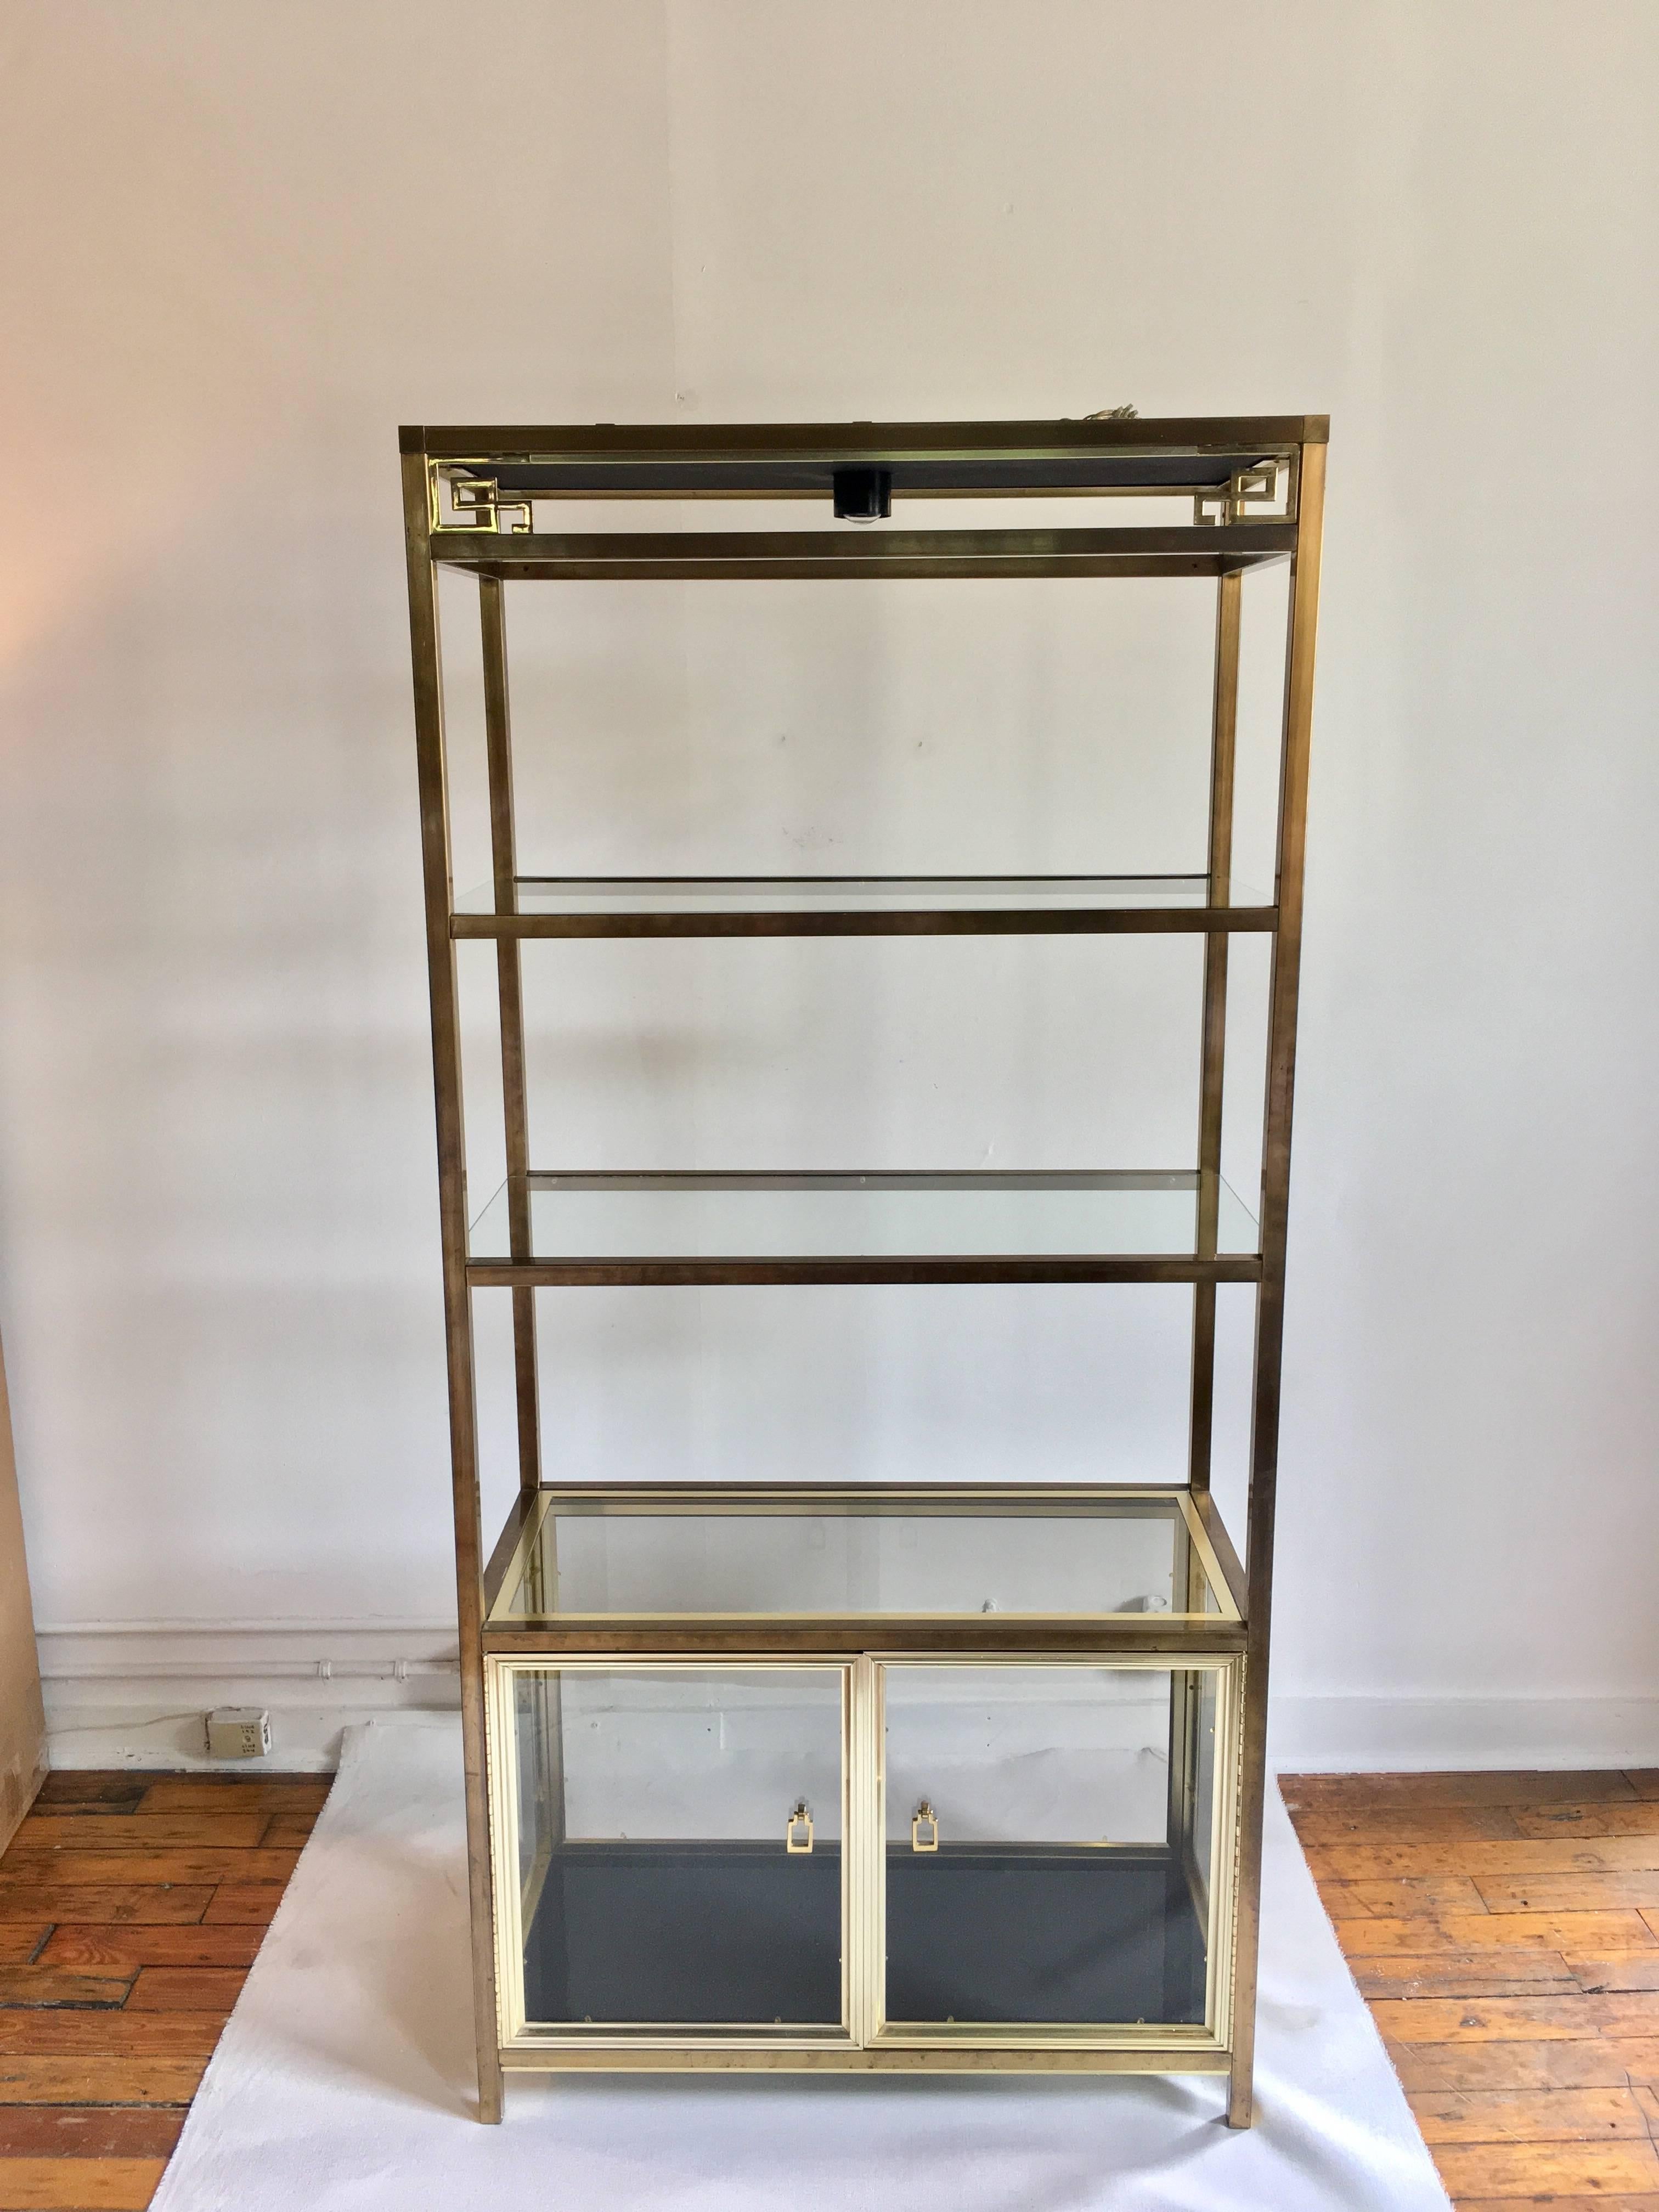 Mid-Century Modern Hollywood Regency style brass and glass étagère shelving cabinet in the style of Mastercraft. Brass gold frame features an Asian/chinoiserie motif with three clear glass shelves and a black glass bottom shelf. Bottom section of